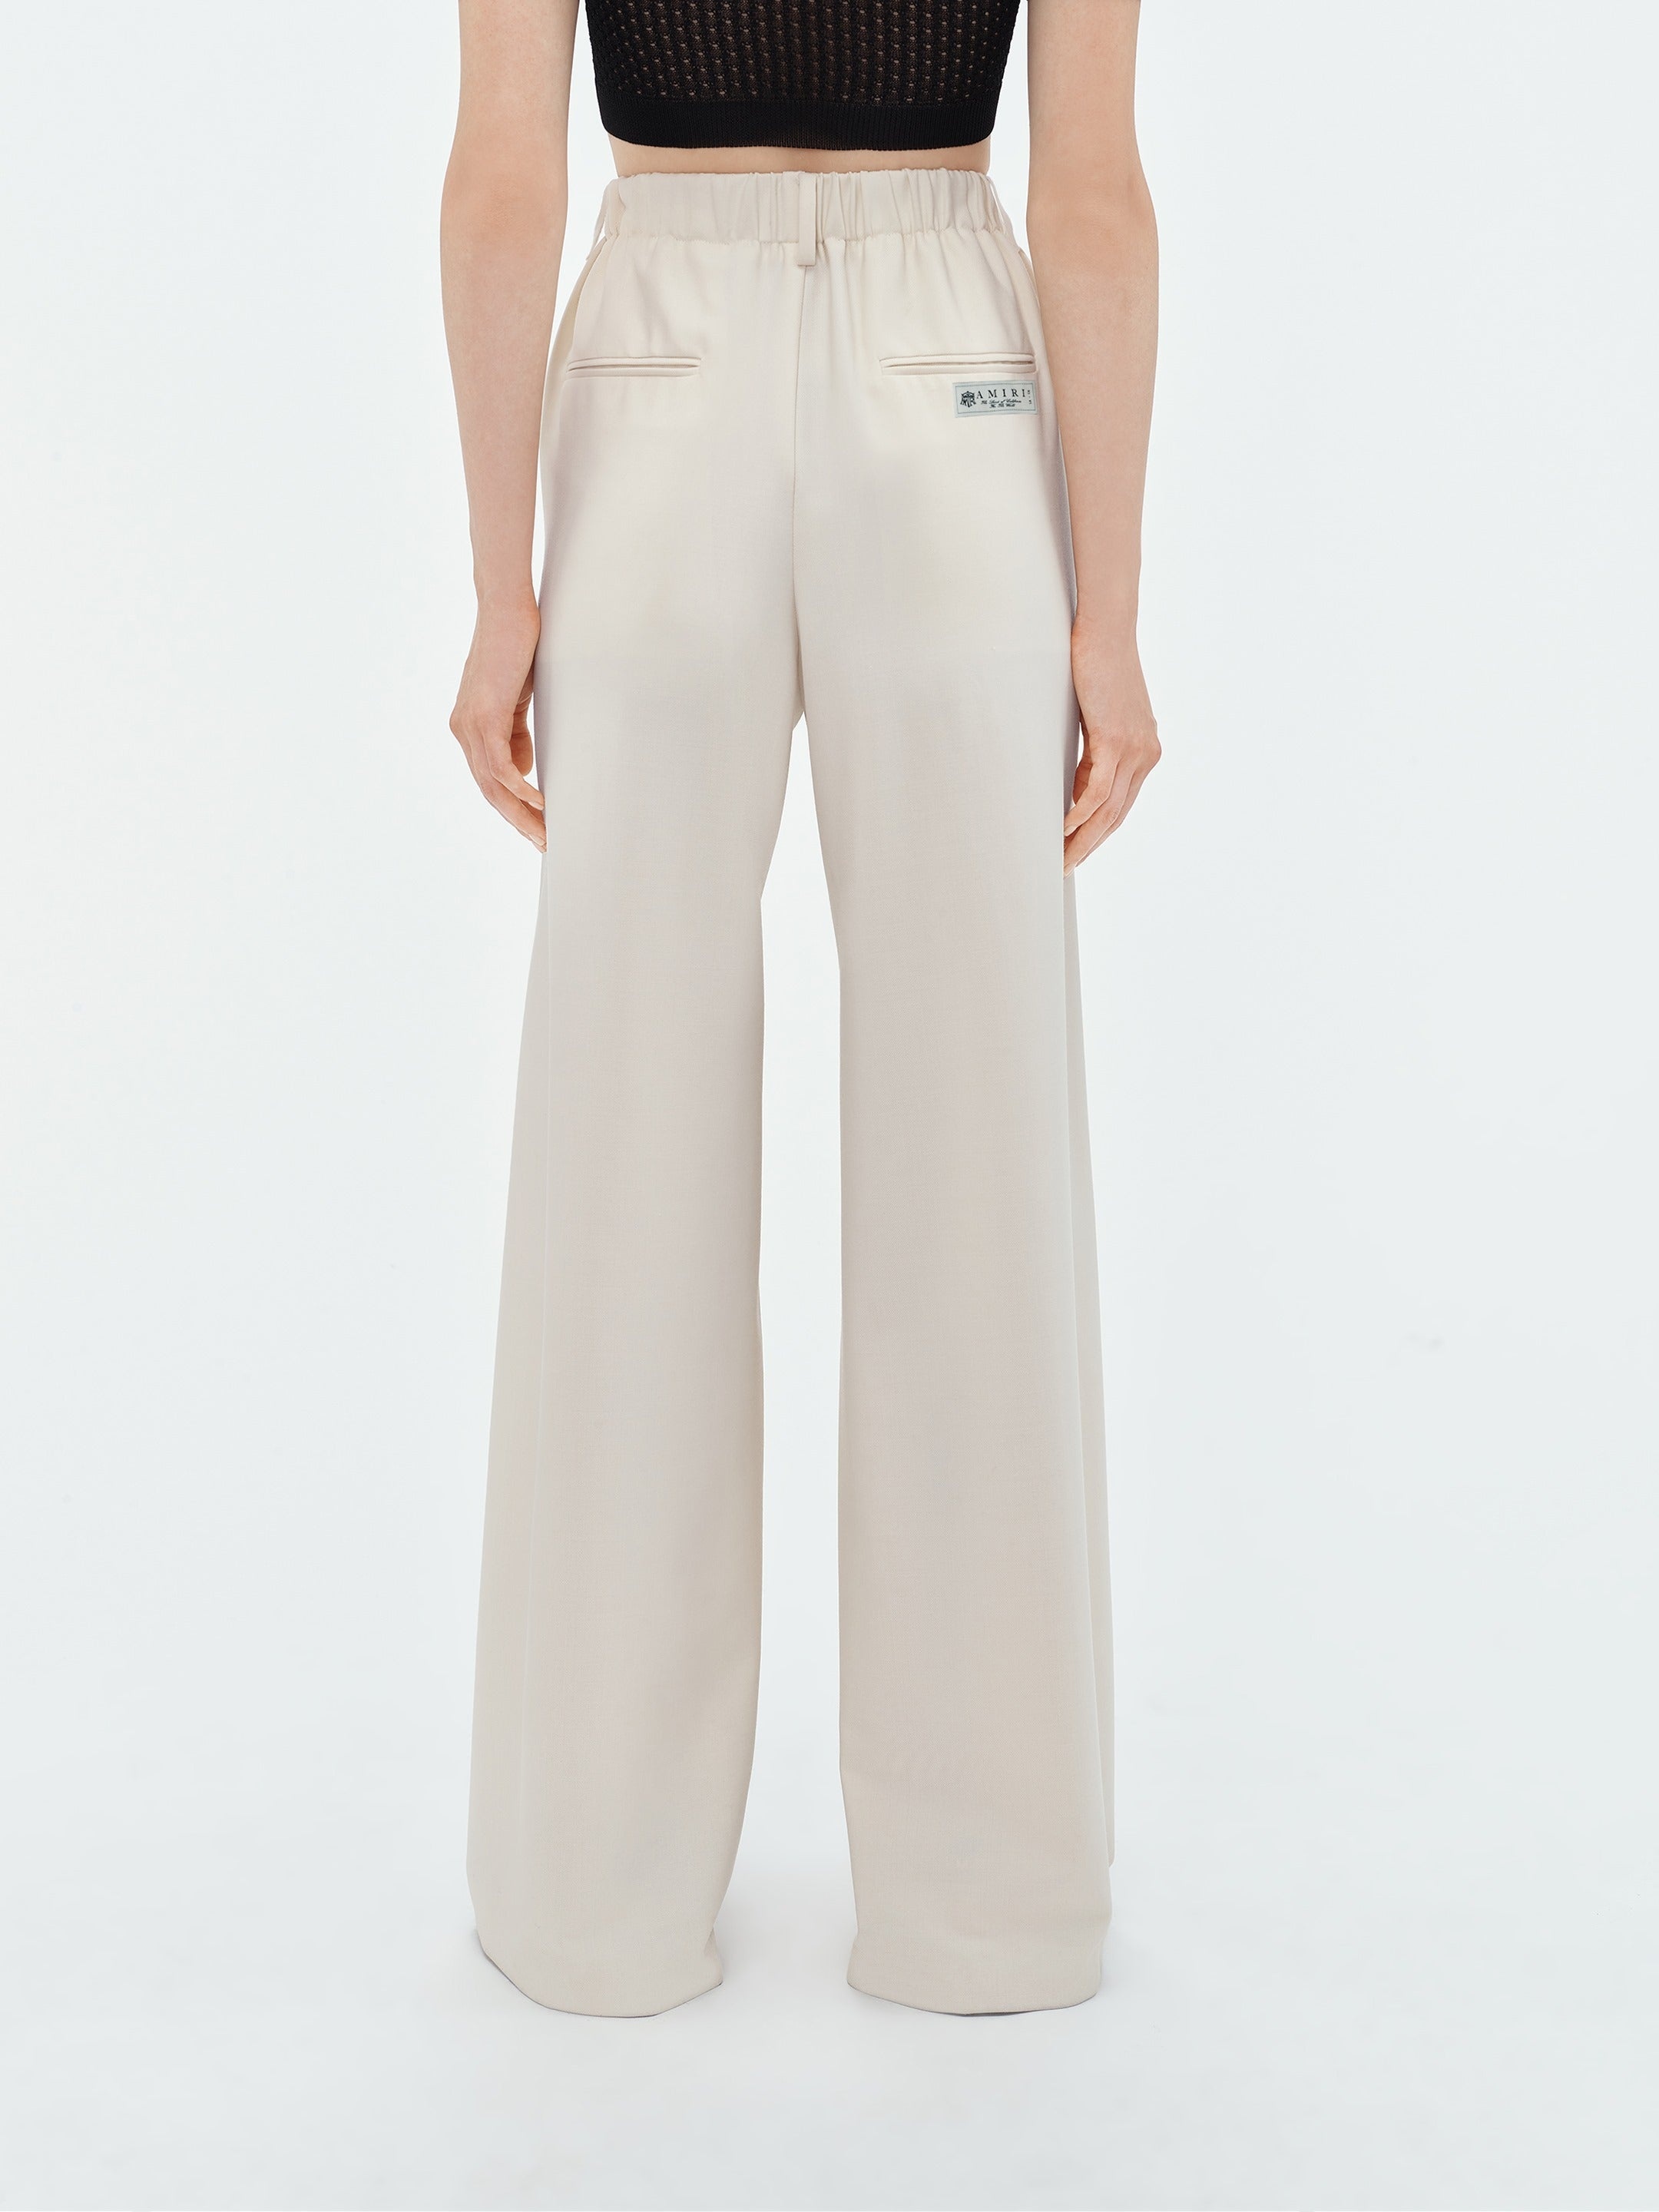 RELAXED DOUBLE PLEATED PANT - 5